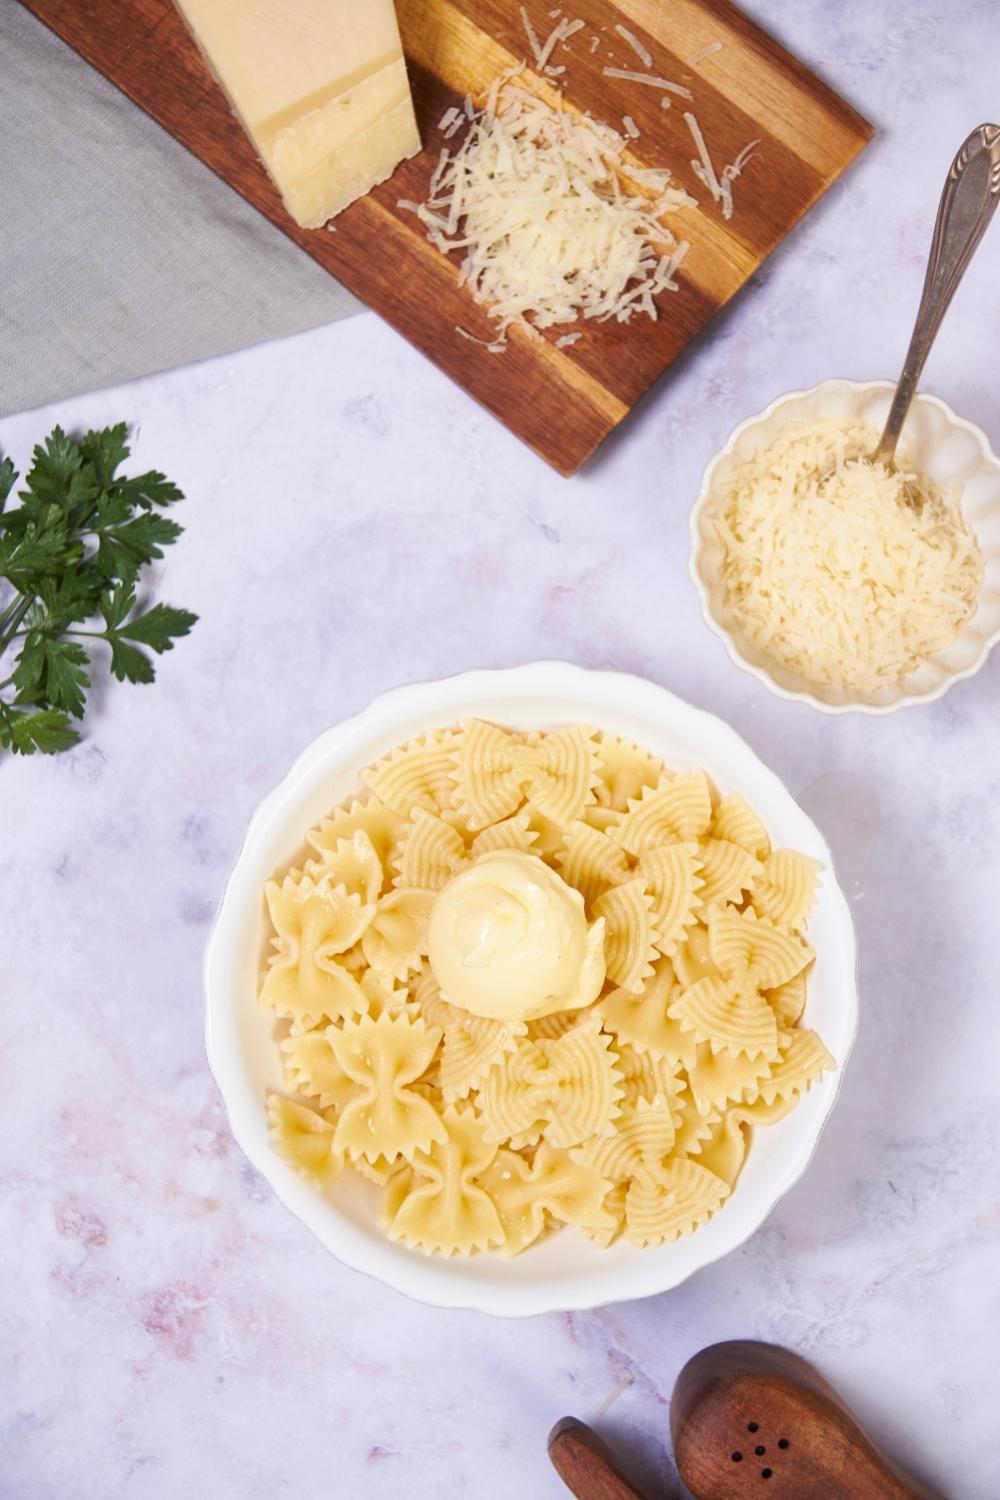 A bowl of microwaved pasta next to a small bowl of parmesan cheese.